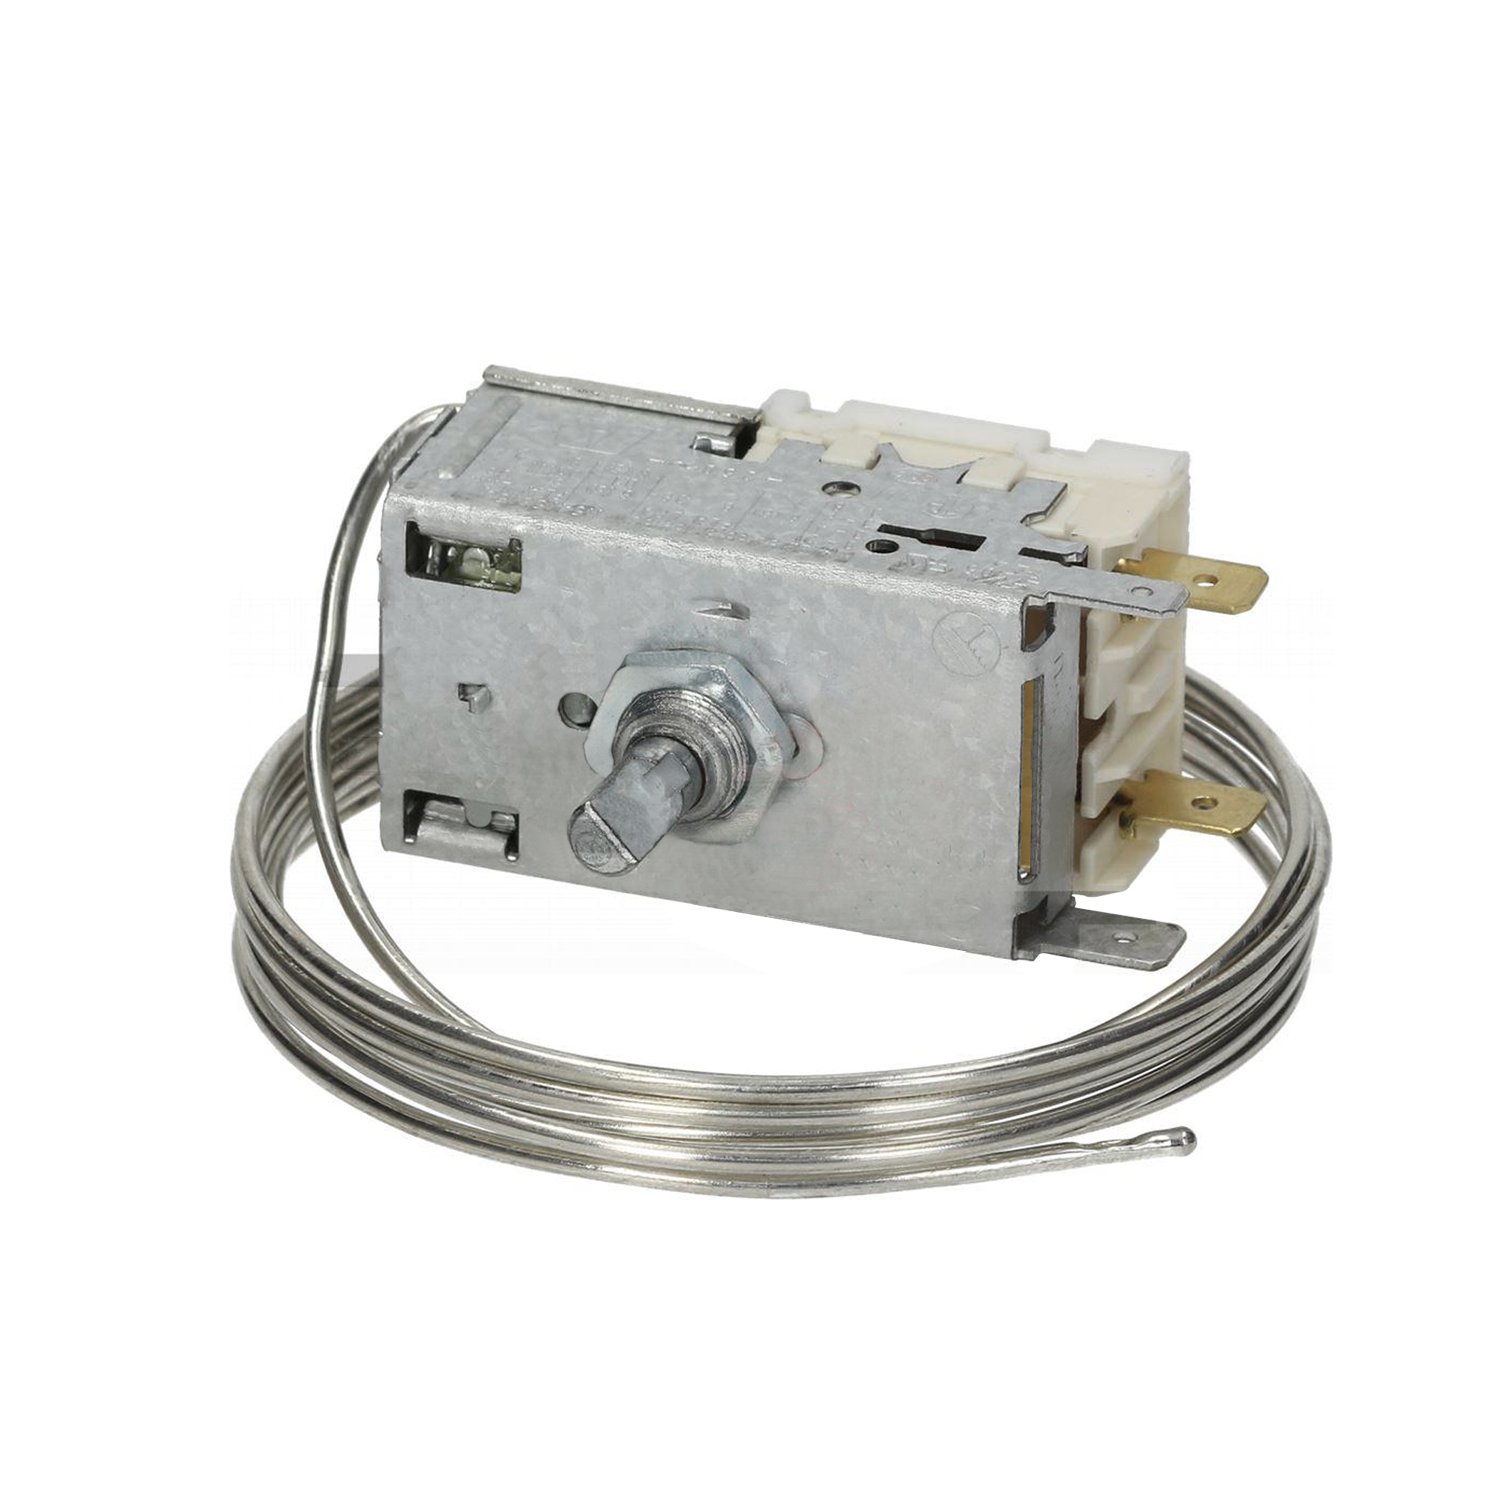 THERMOSTAT RANCO K50-L3337,2 contacts 6A 250V Capillary tube 1500 mm cold 0°C, warm +10°C - DT4°C crescent-shaped pin ø 6 x 4.6 mm